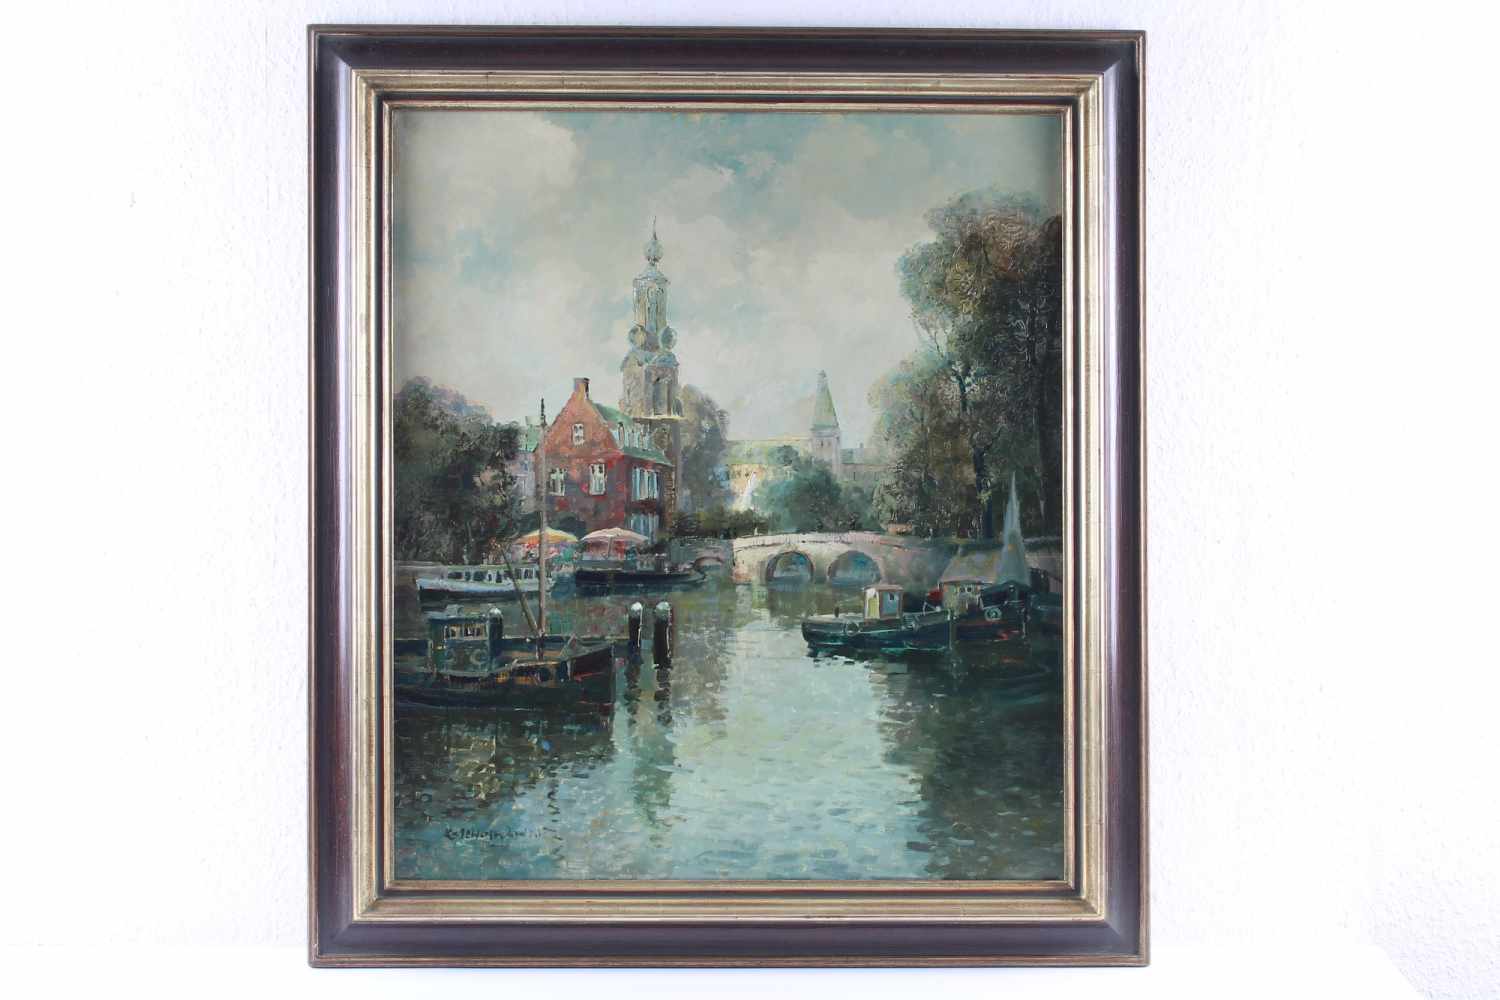 Ludwig Gschossmann (1913-1988) - Amsterdamer Gracht mit Booten, Amsterdam with boats, - Image 2 of 4